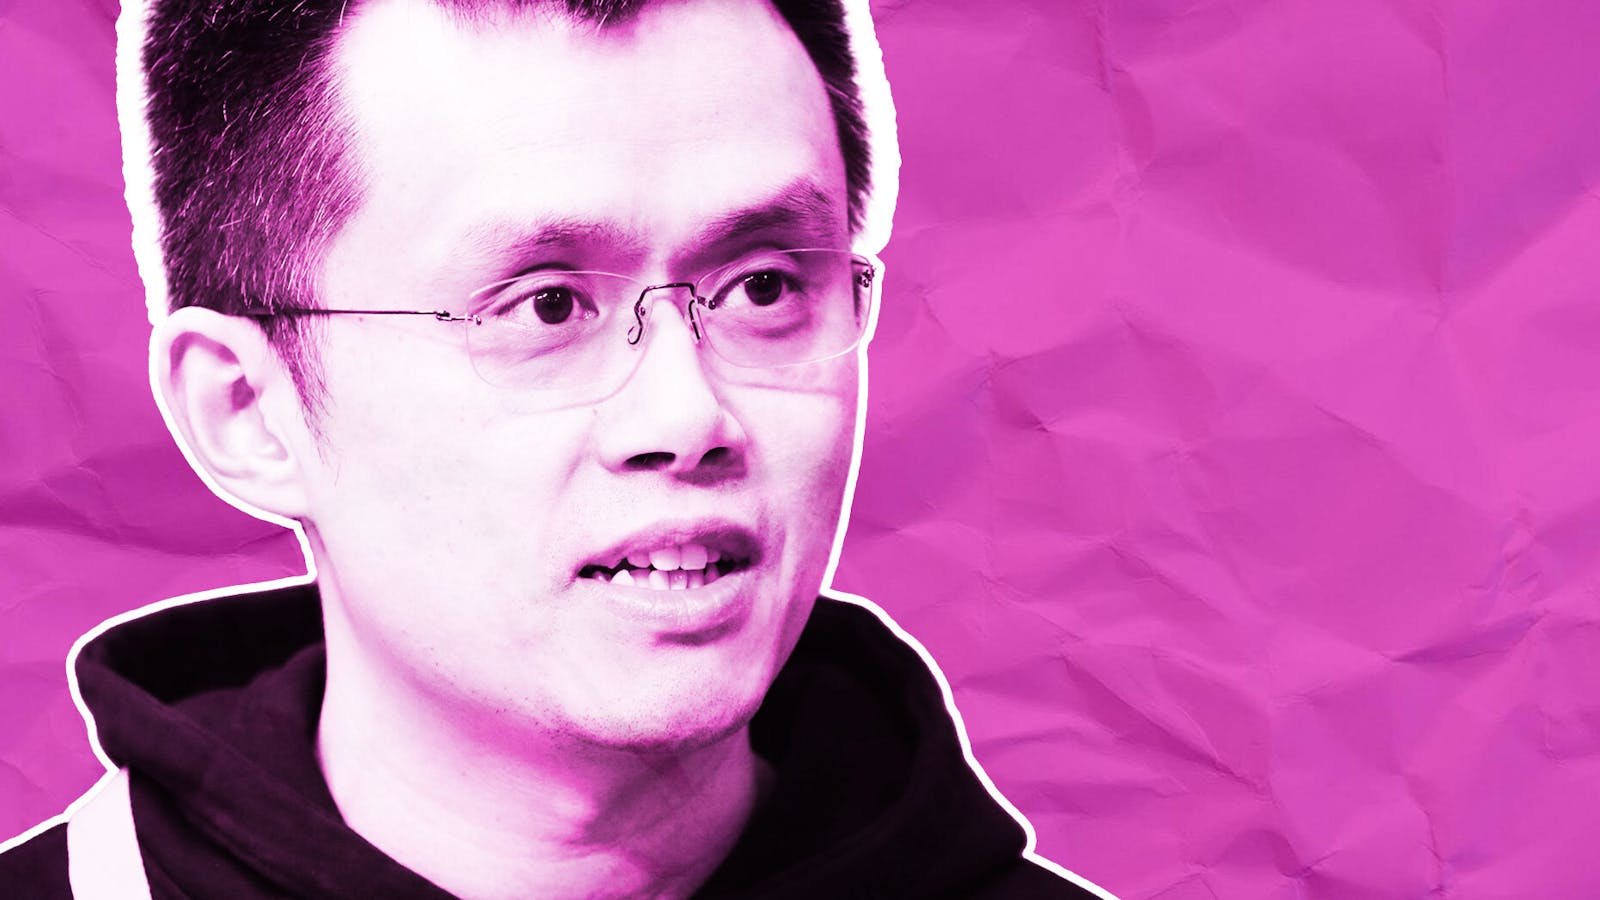  Changpeng Zhao, CEO and founder of Binance. Photo by Bloomberg